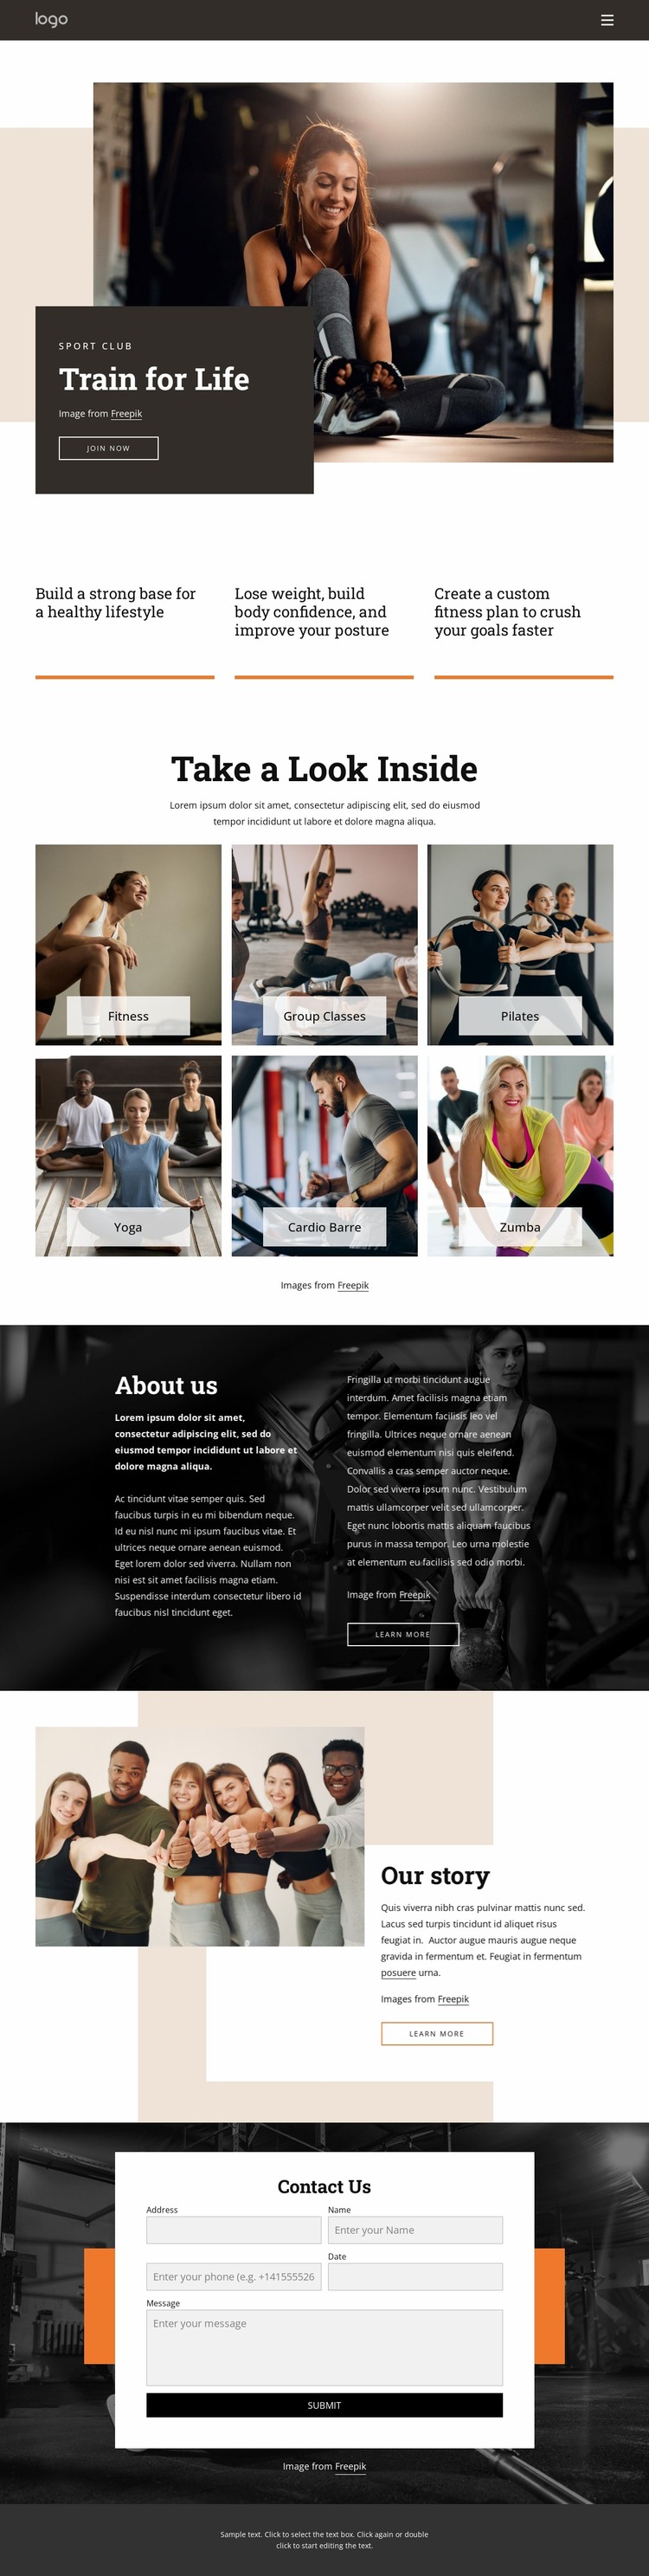 Get moving with our range of classes Website Mockup